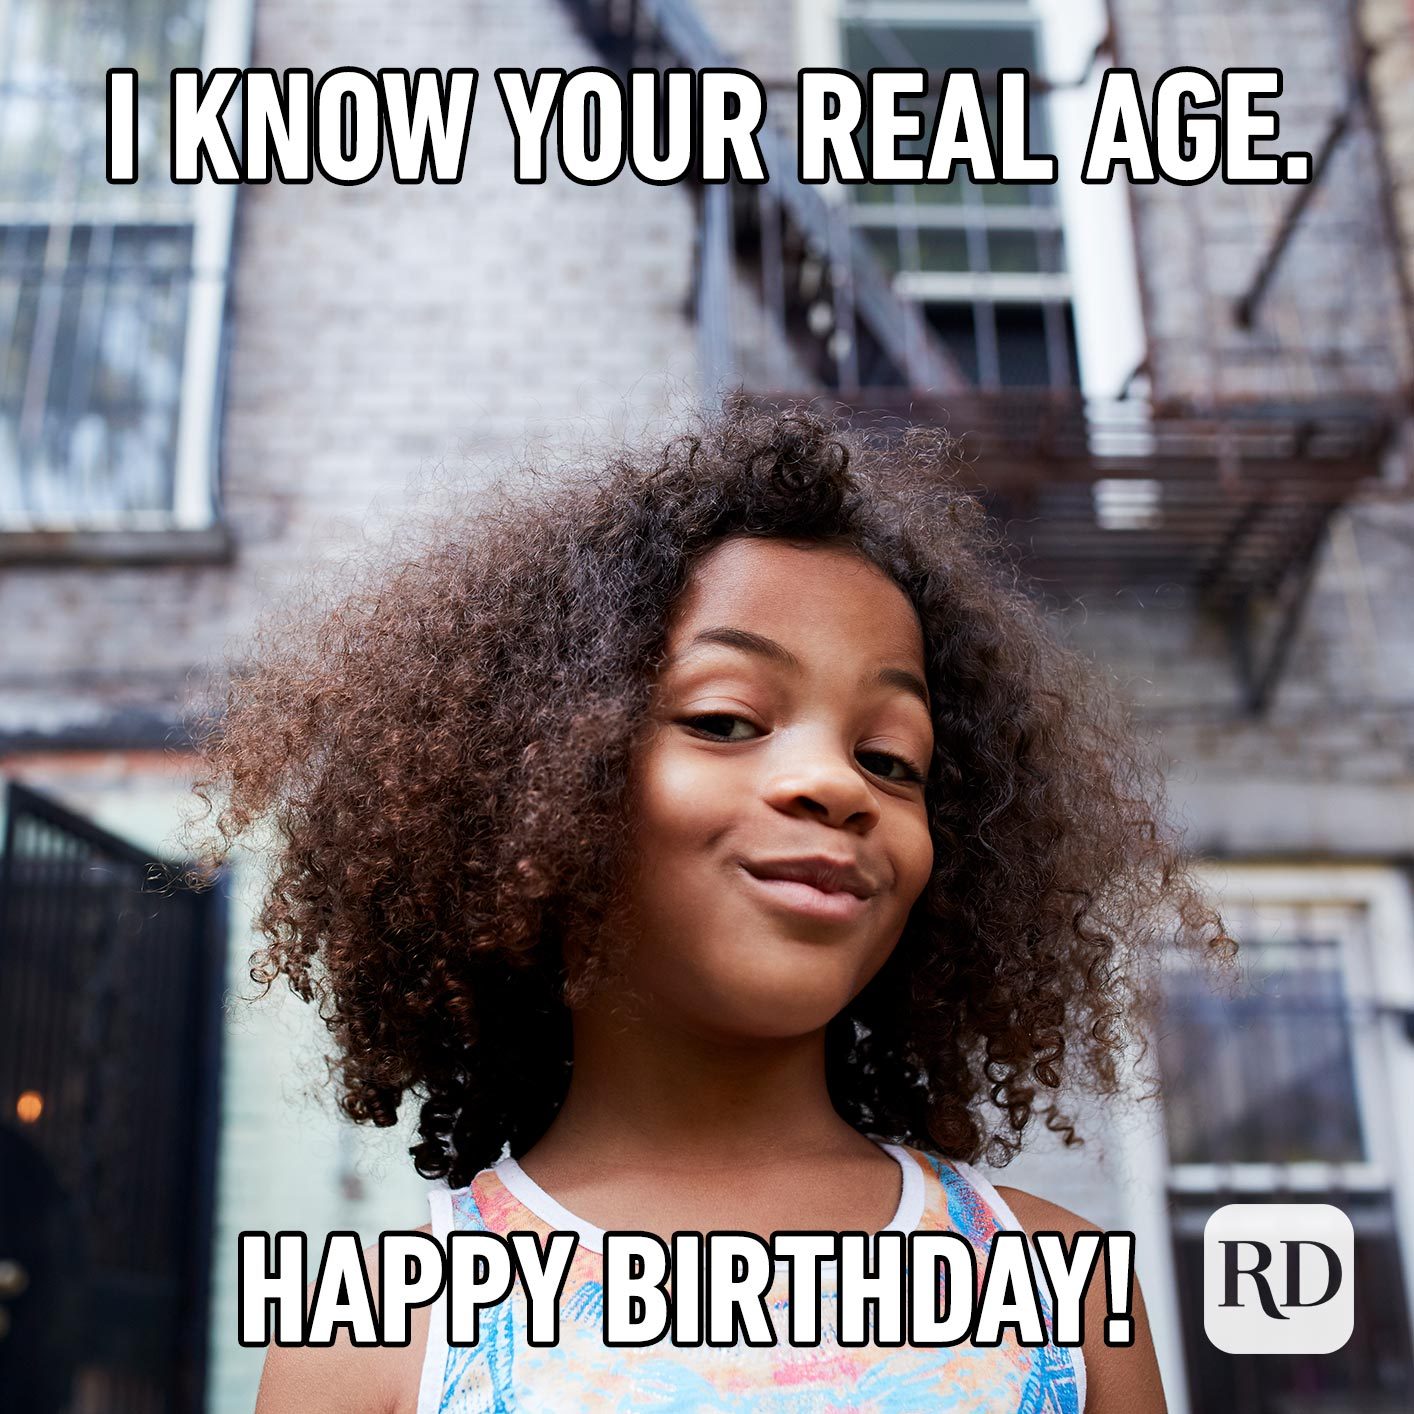 Get A Laugh Out Of Your Best Friend With These Funny Birthday Wishes On